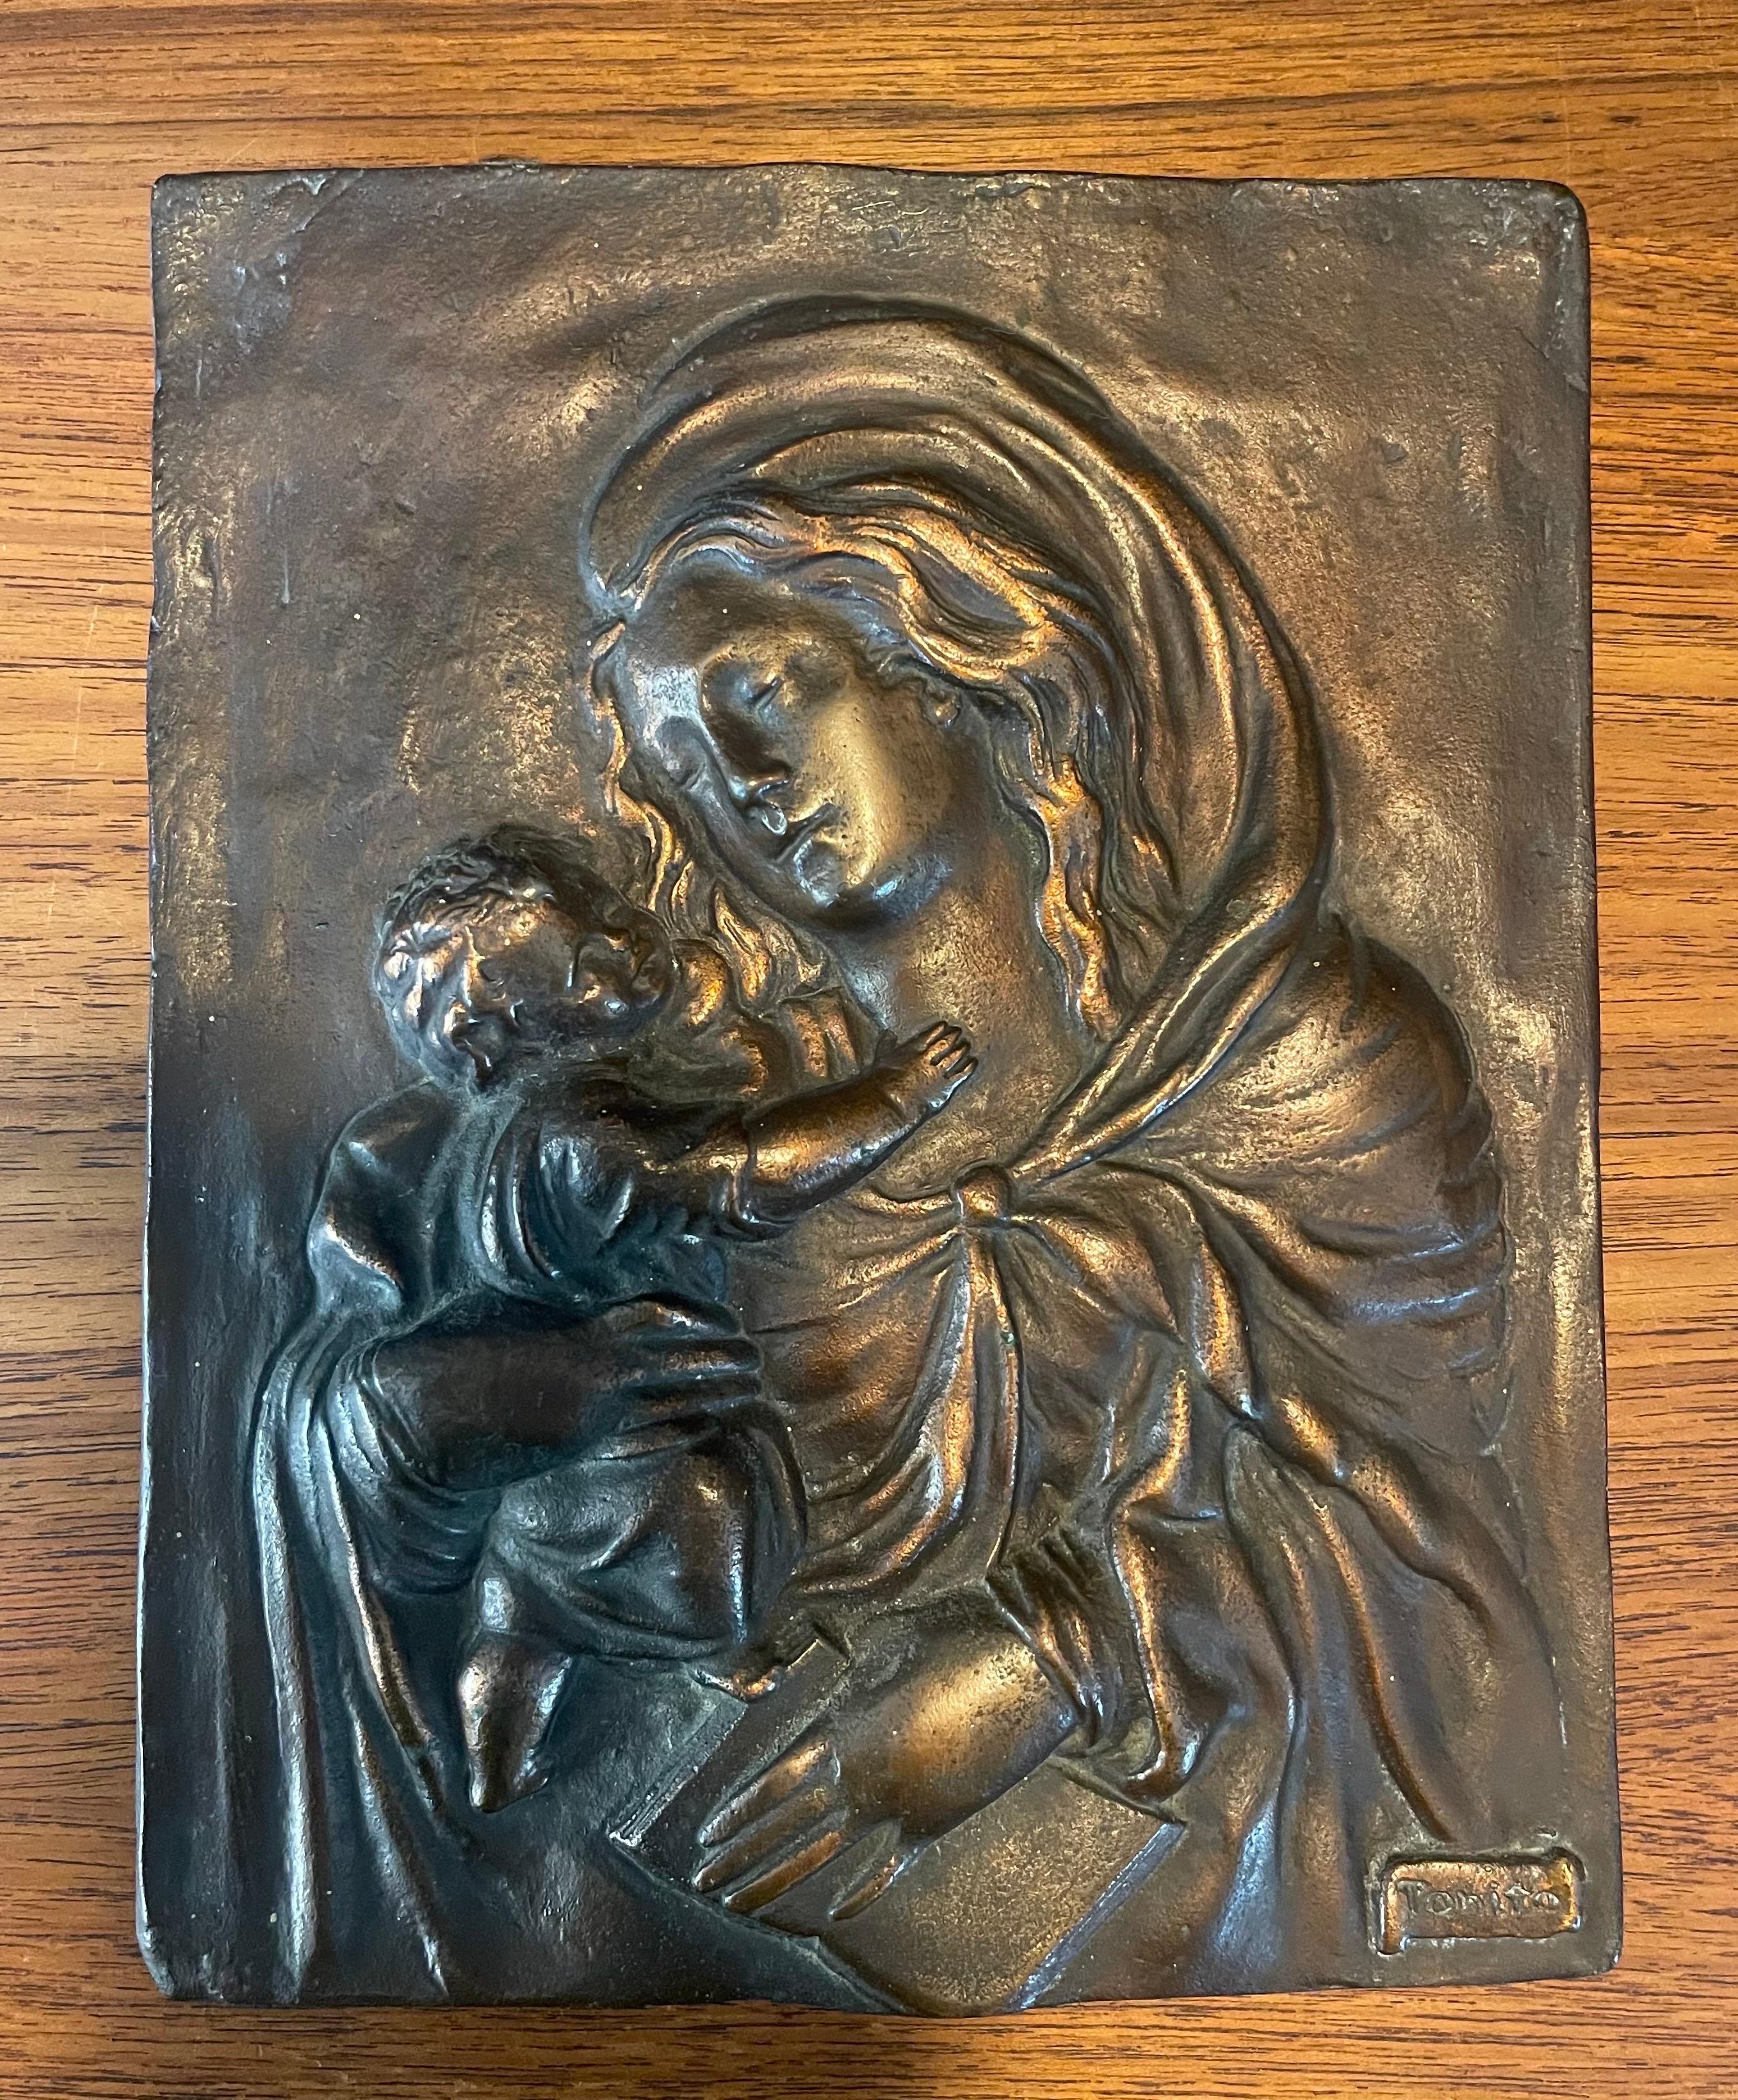 Rectangular high-relief copper Madonna & Child wall plaque, circa 1970s. The piece is made of cast copper and measures 8.5